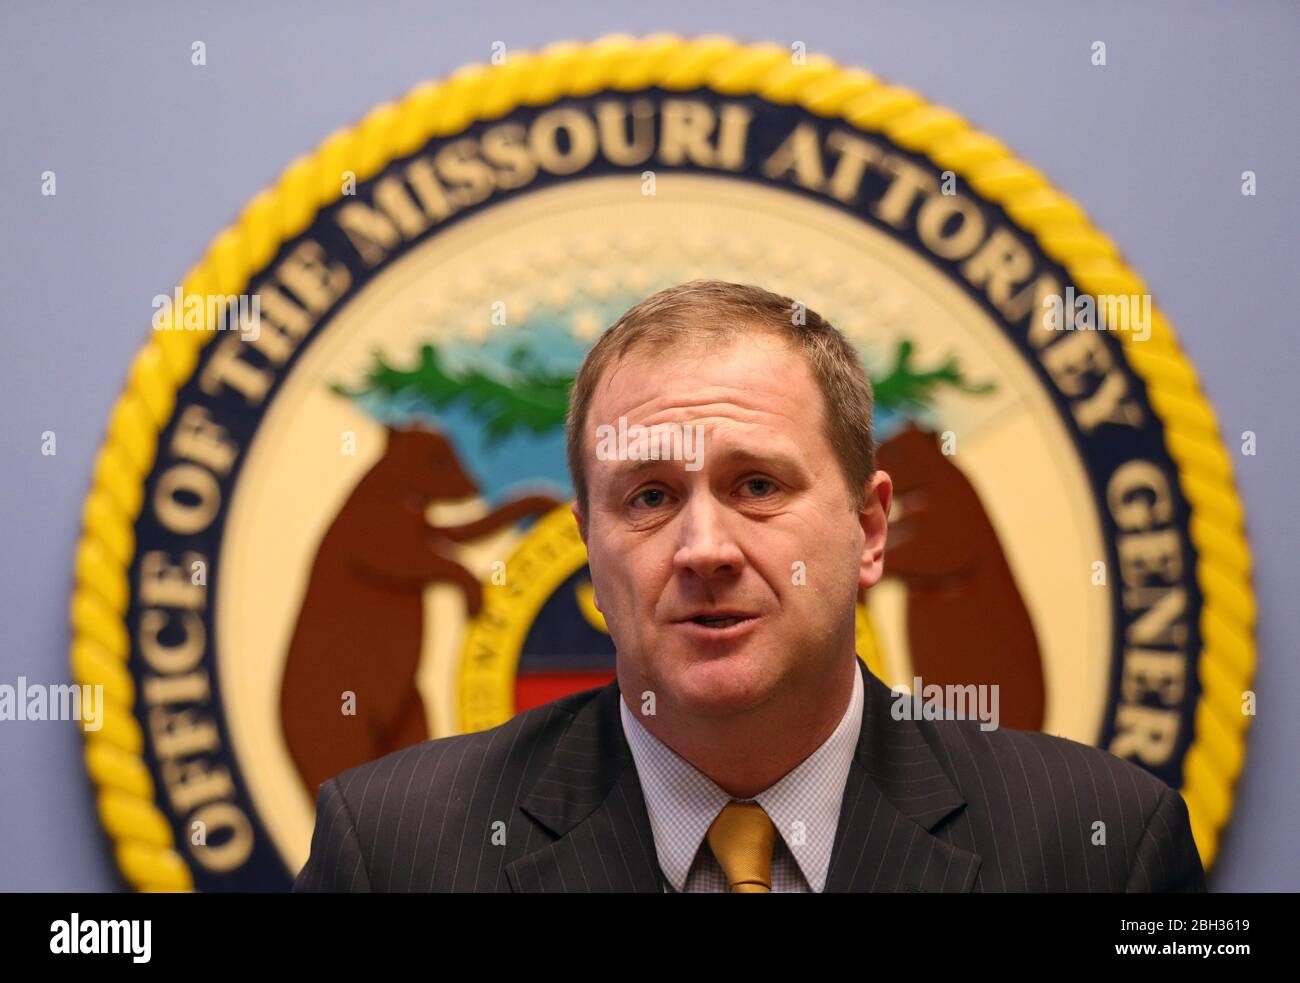 Missouri Attorney General Eric Schmitt, shown in this January 22, 2019 file photo, is suing the Chinese government, his office announced on Tuesday, April 21, 2020. The lawsuit, filed in the U.S. Credit: UPI/Alamy Live News Stock Photo